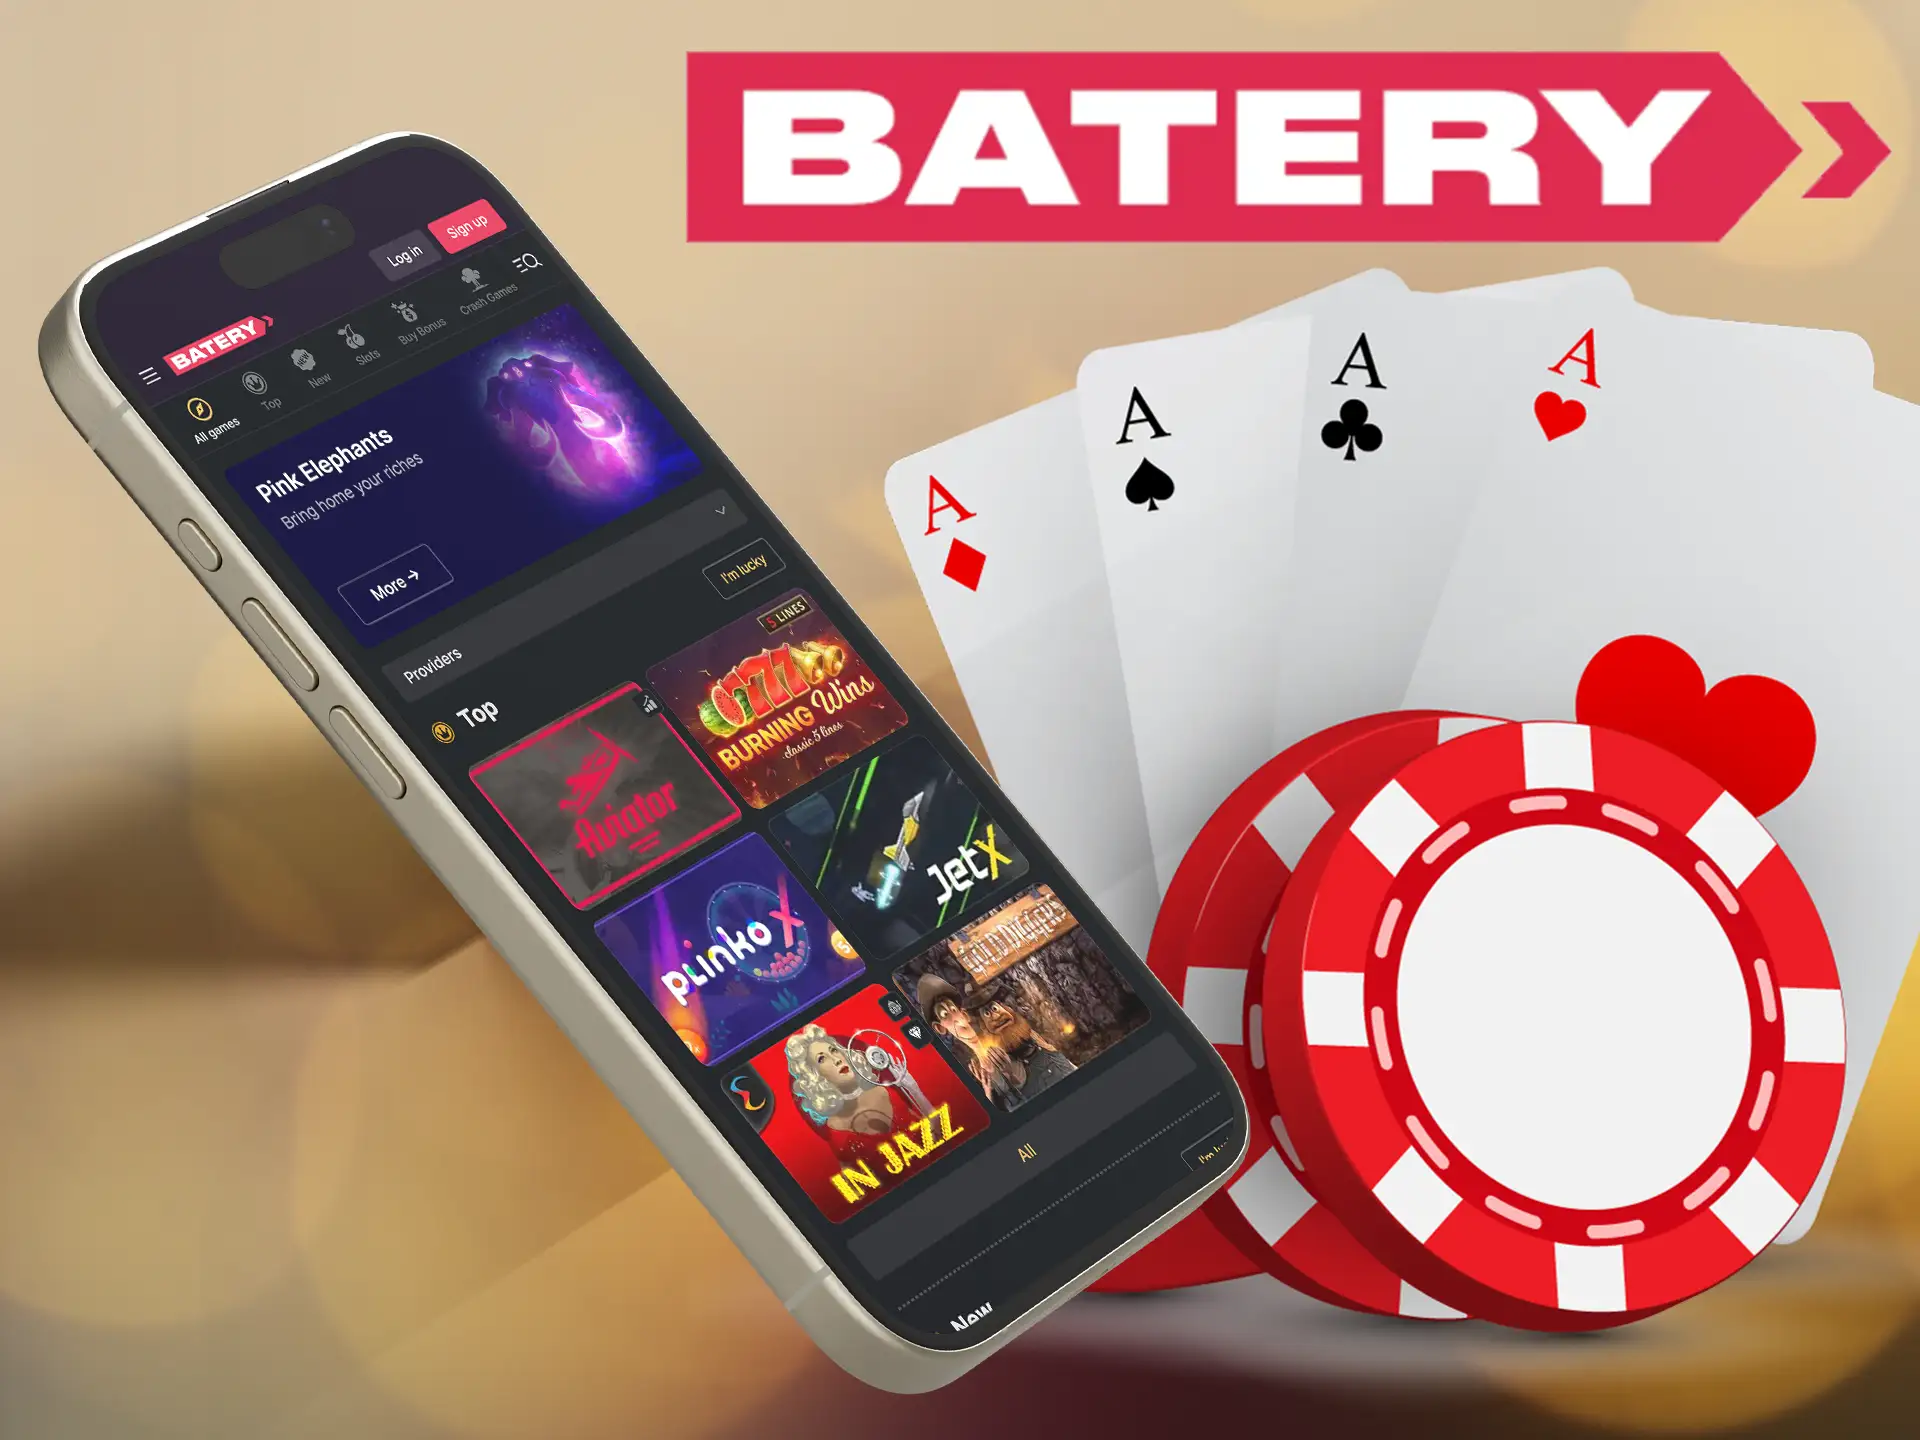 Take your game to the next level, try the cross-platform app from Batery.